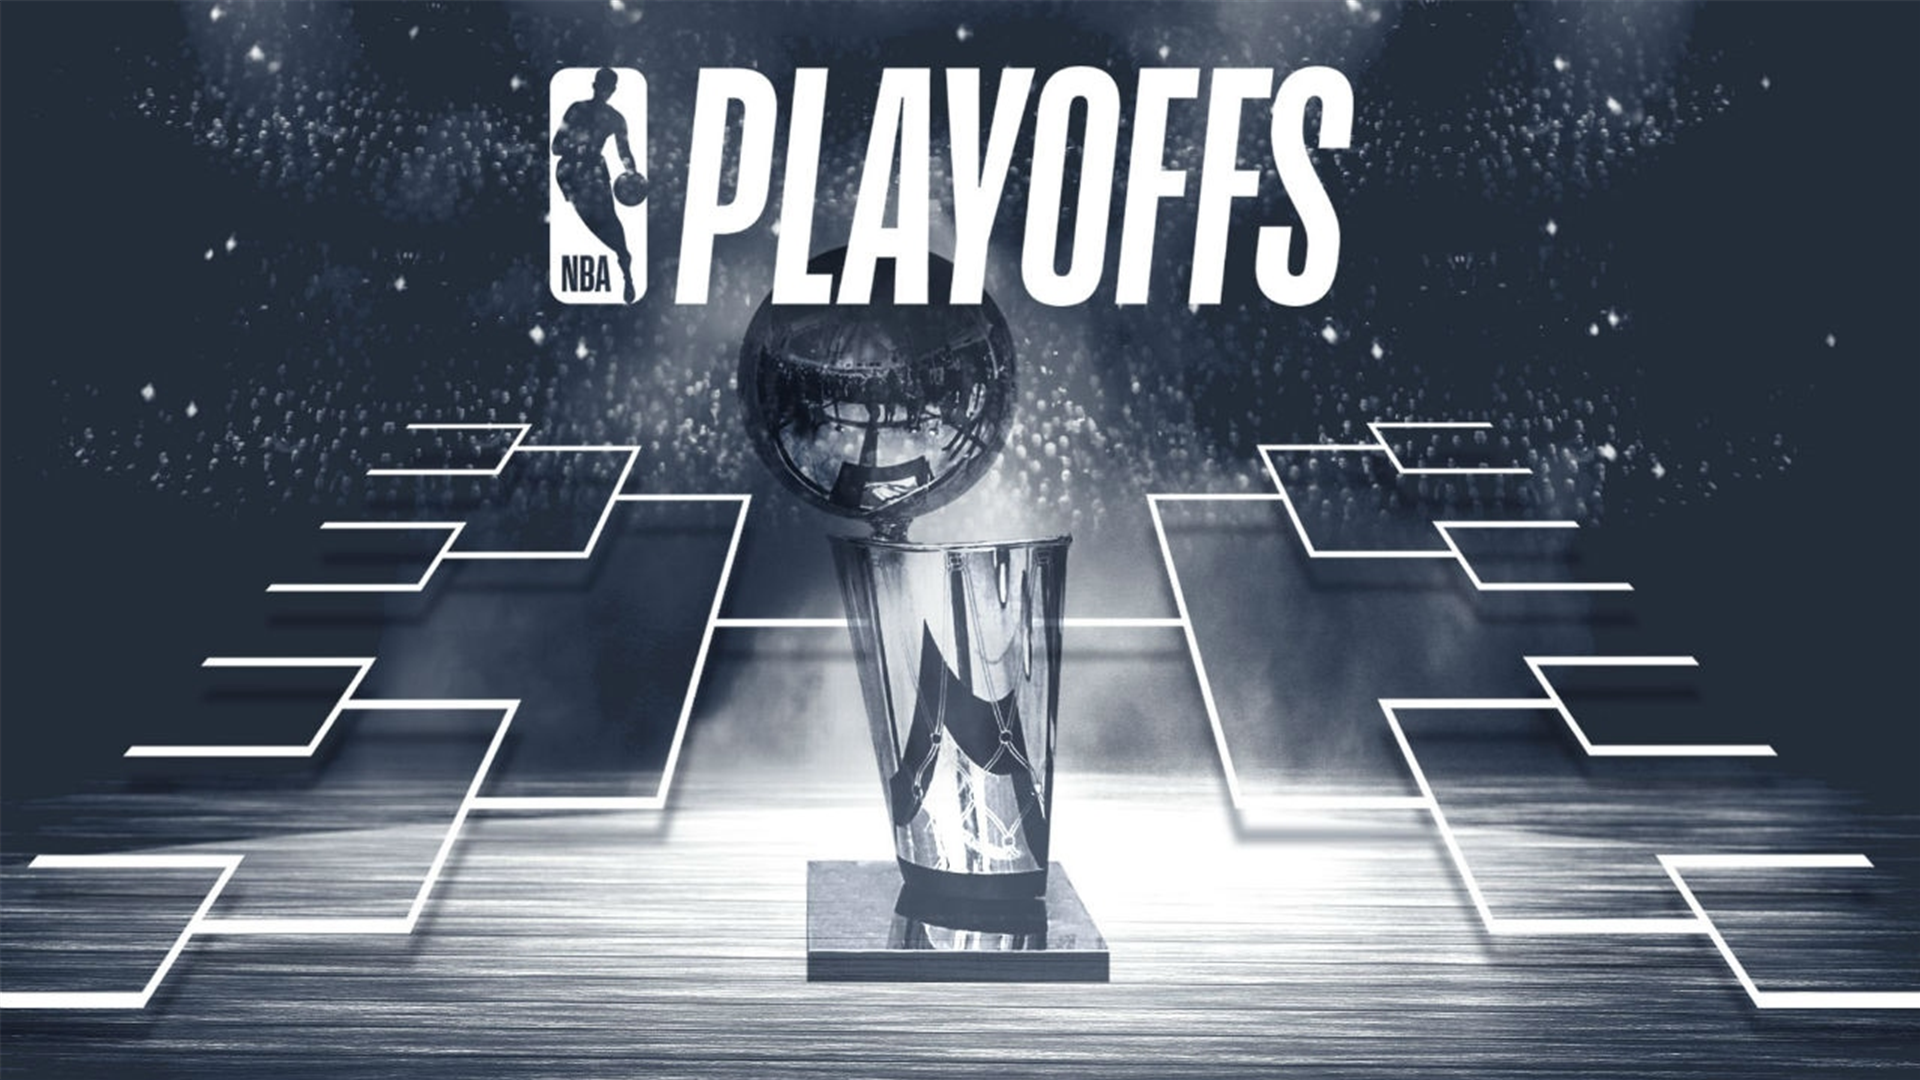 NBA Playoffs 2019: Complete first round schedule - TV times, channel, streaming ...1920 x 1080